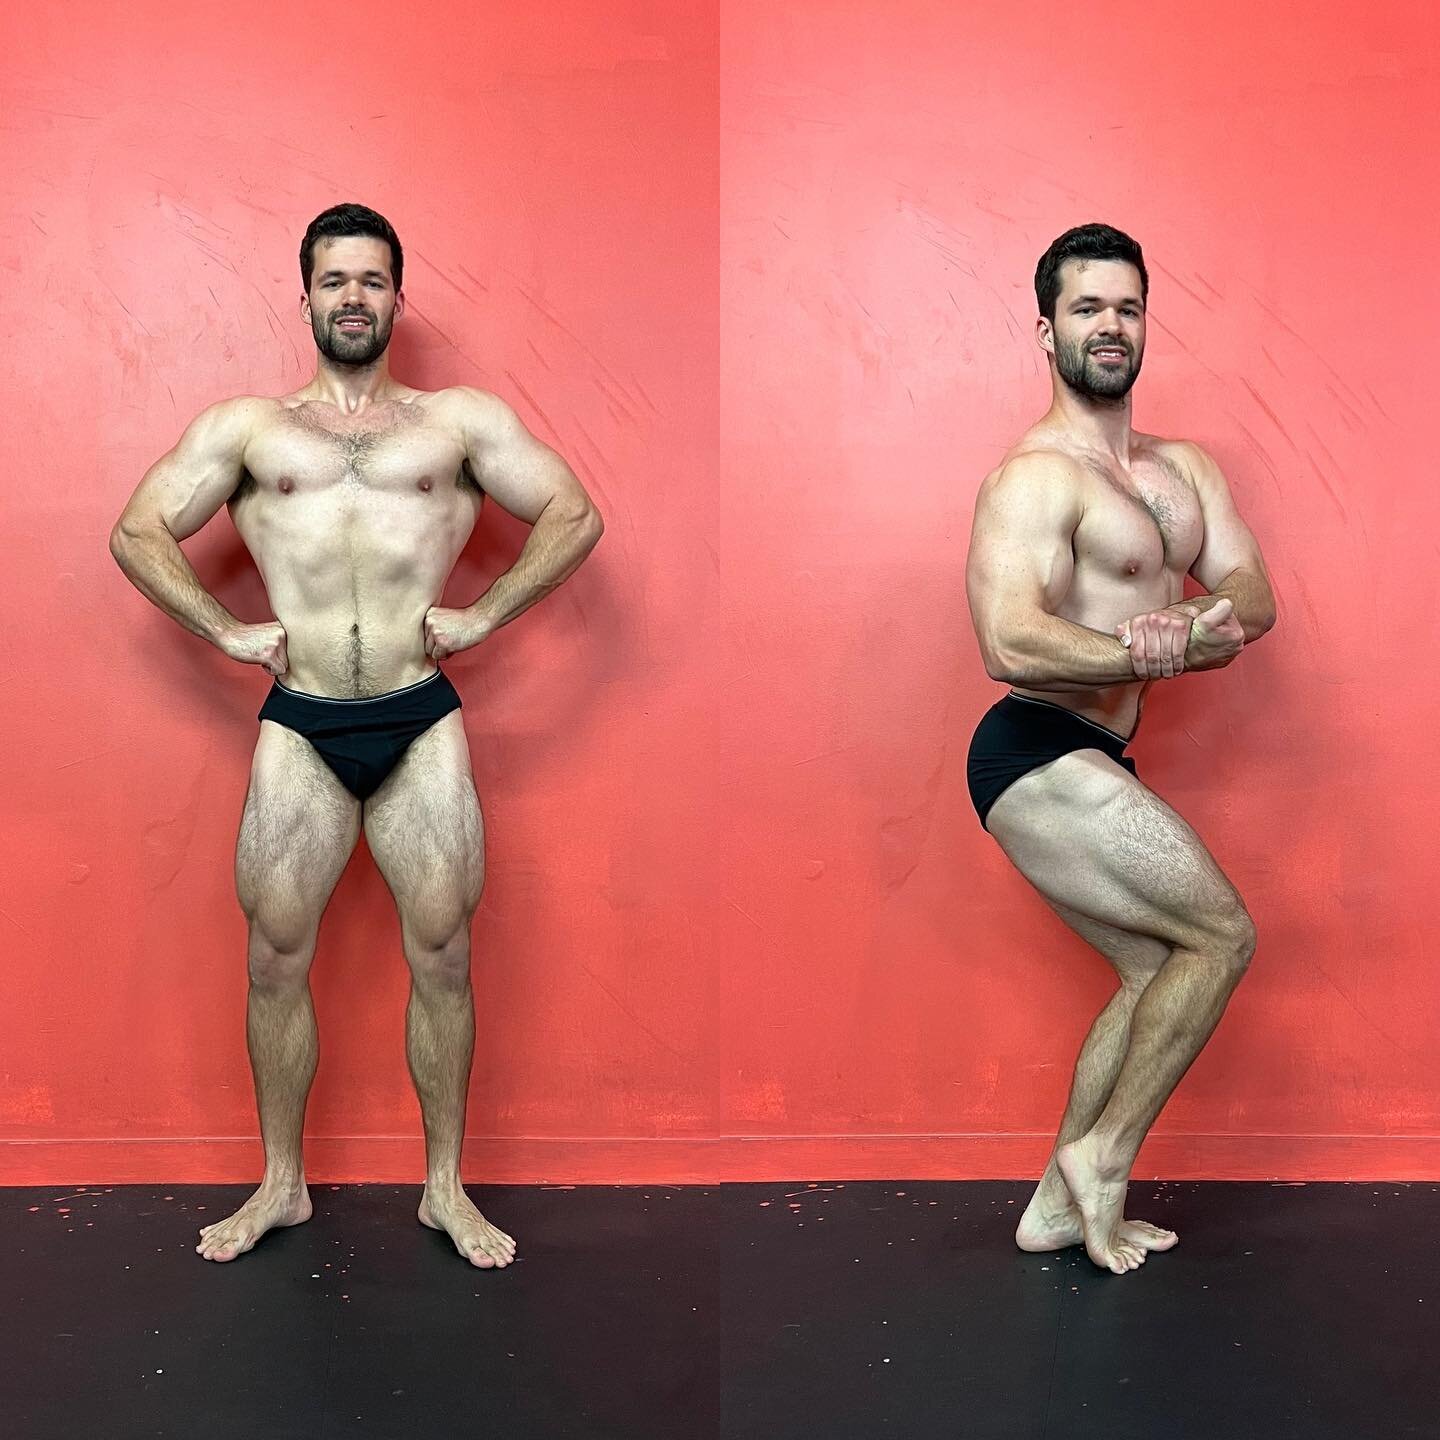 57 weeks of continuous gaining has come to an end.

Yesterday I commenced my first minicut of the improvement season. The goal of this 6-8 week block will be to strip off some weight and reveal some of the improvements I&rsquo;ve made to my physique 